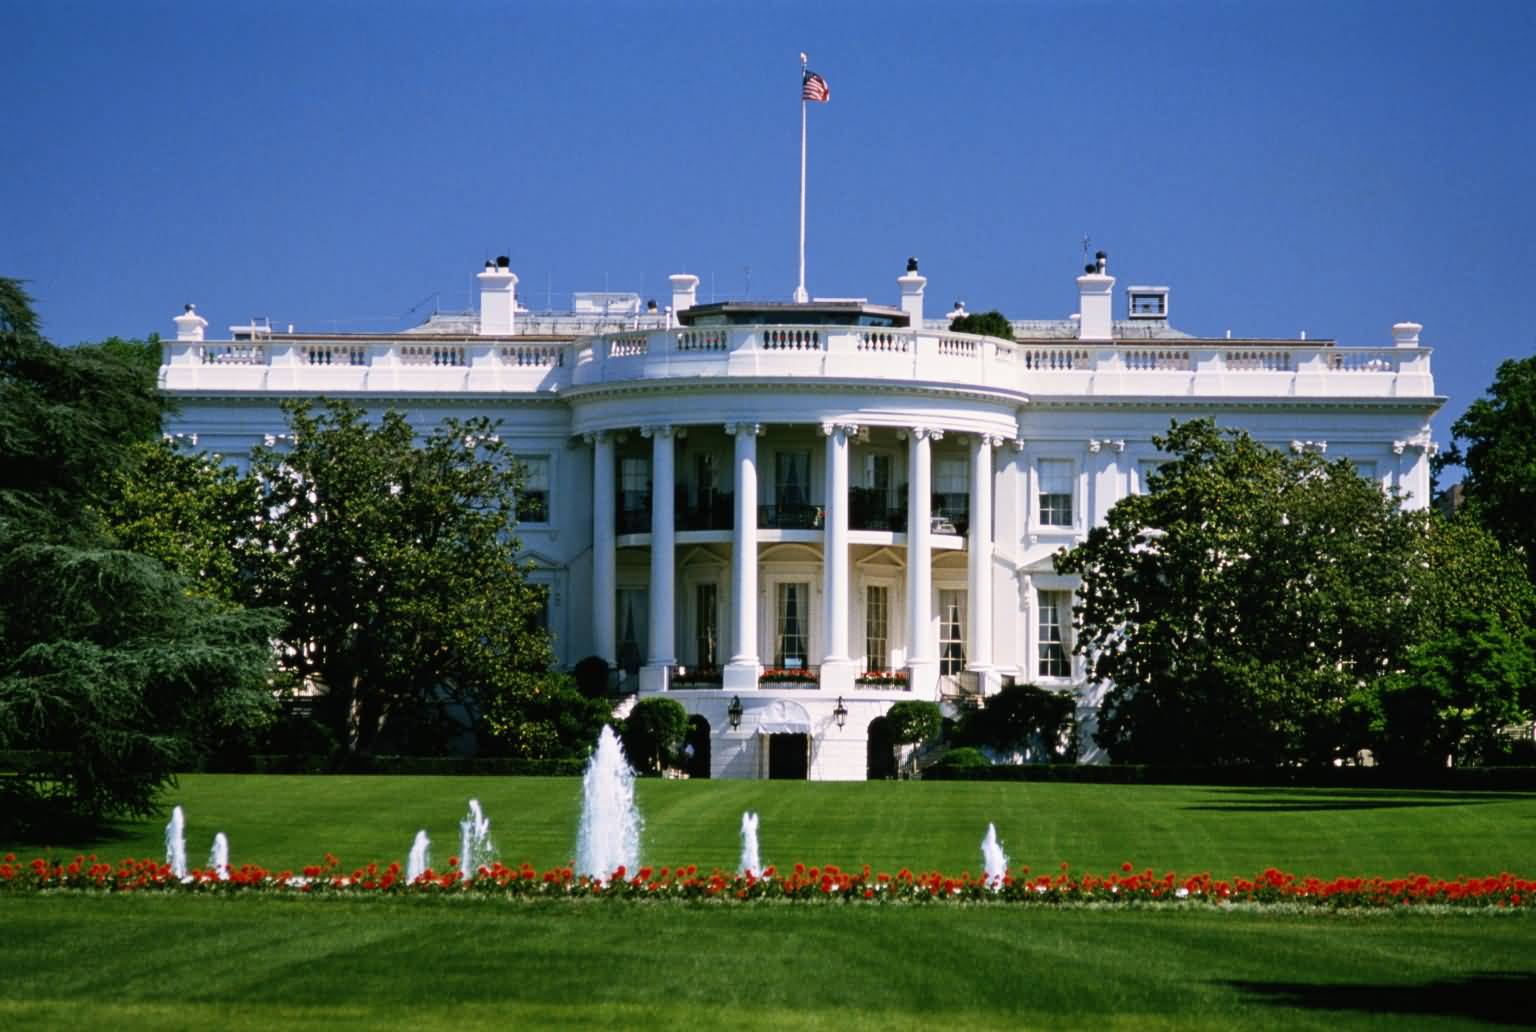 White House View With Garden And Fountains In Foreground